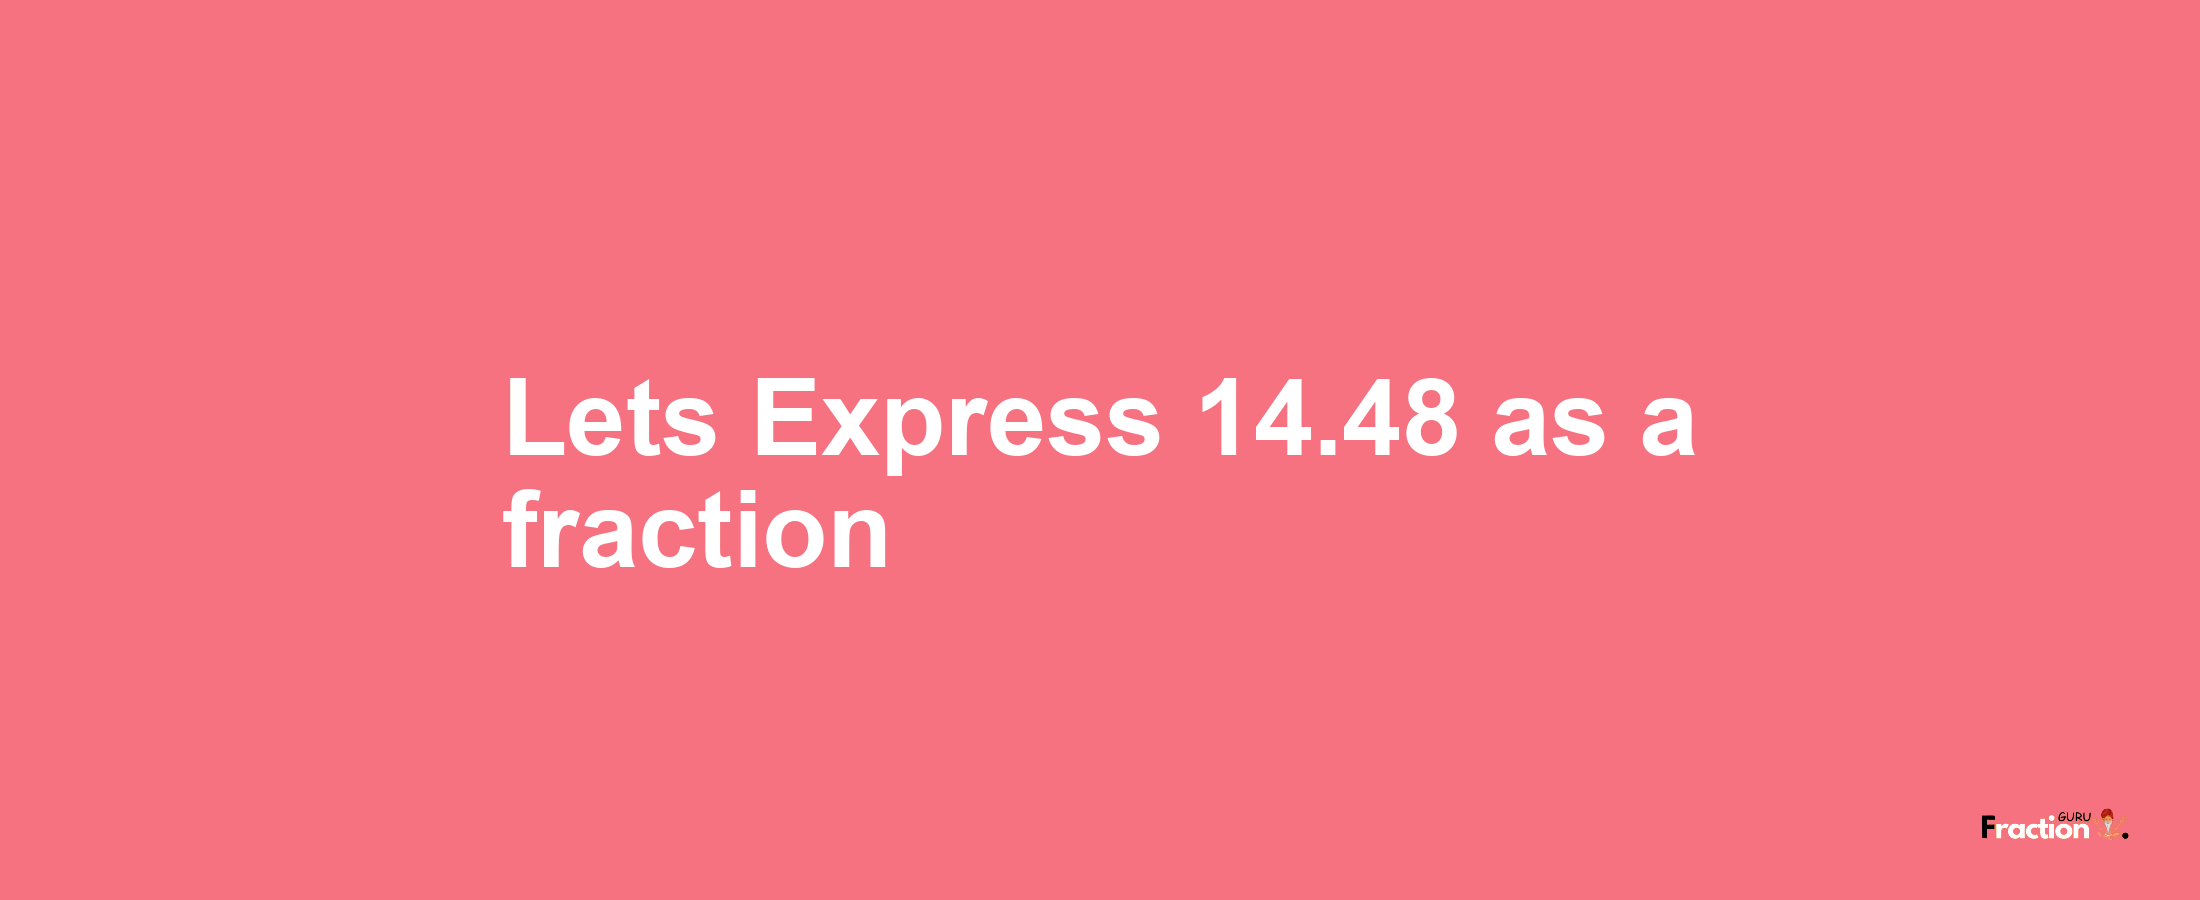 Lets Express 14.48 as afraction